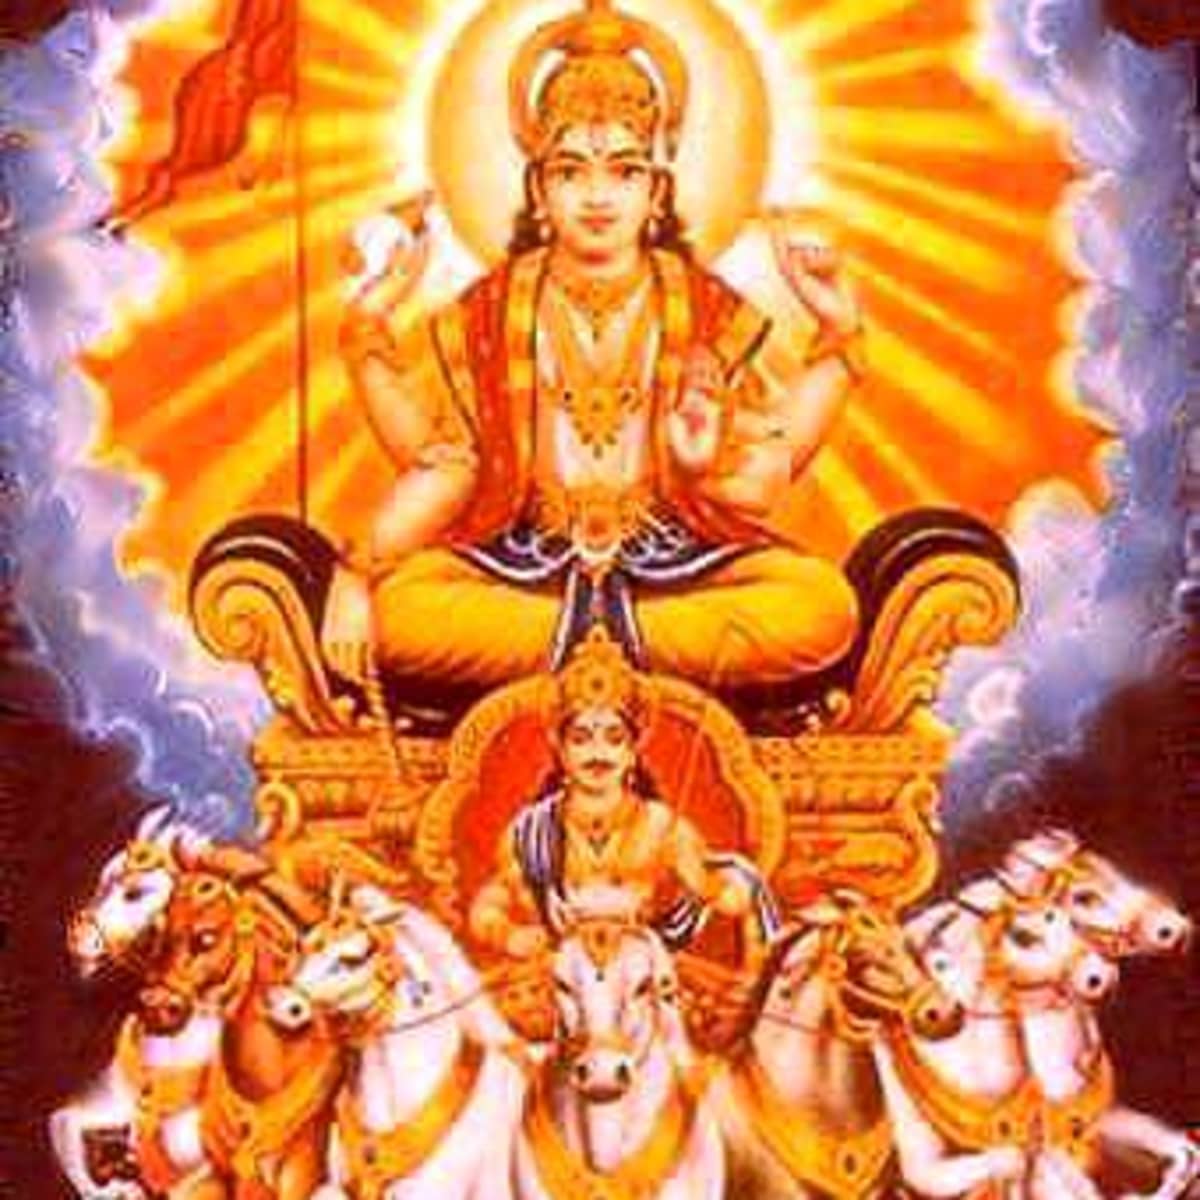 Benefits of Worshipping the Sun-god - HubPages